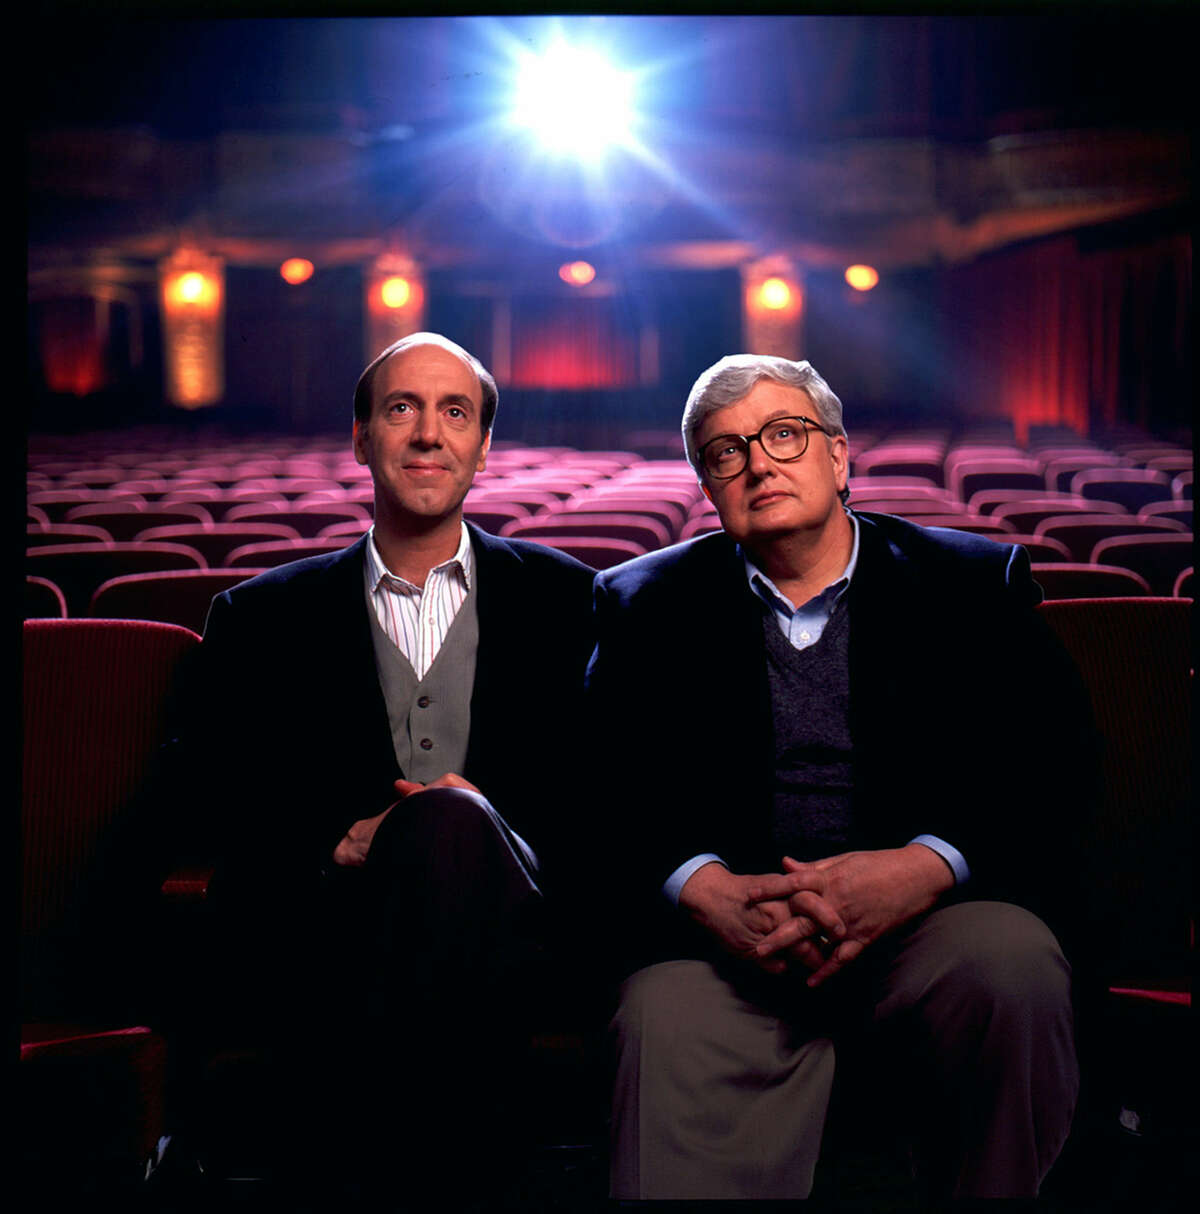 Roger Ebert (right) wrote in his 2011 memoir that Gene Siskel, who died in 1999, was “in my mind almost every day.”